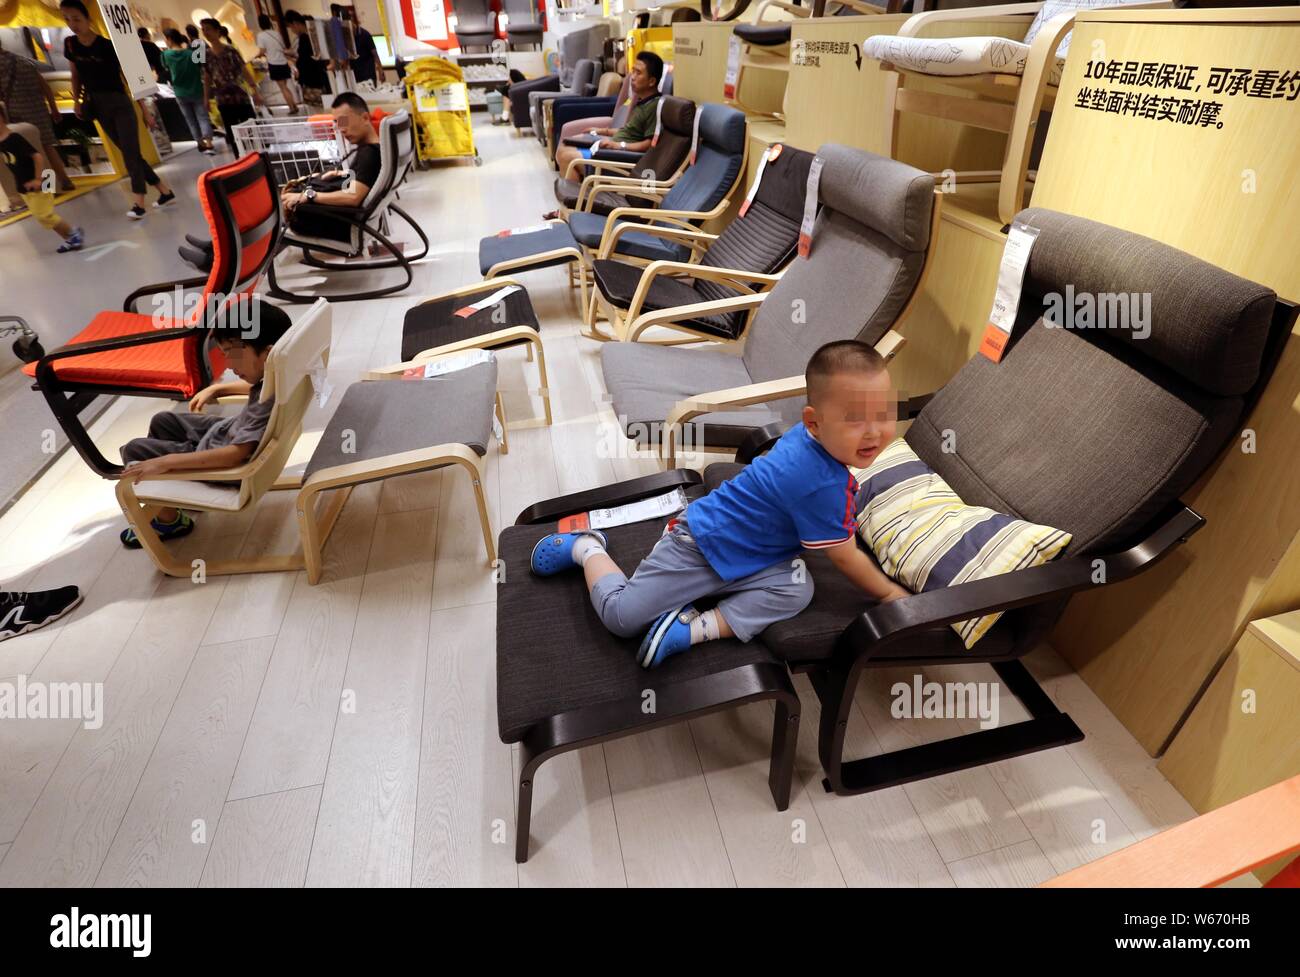 Chinese Shoppers Who Are Escaping The Heatwave Rest In Chairs At